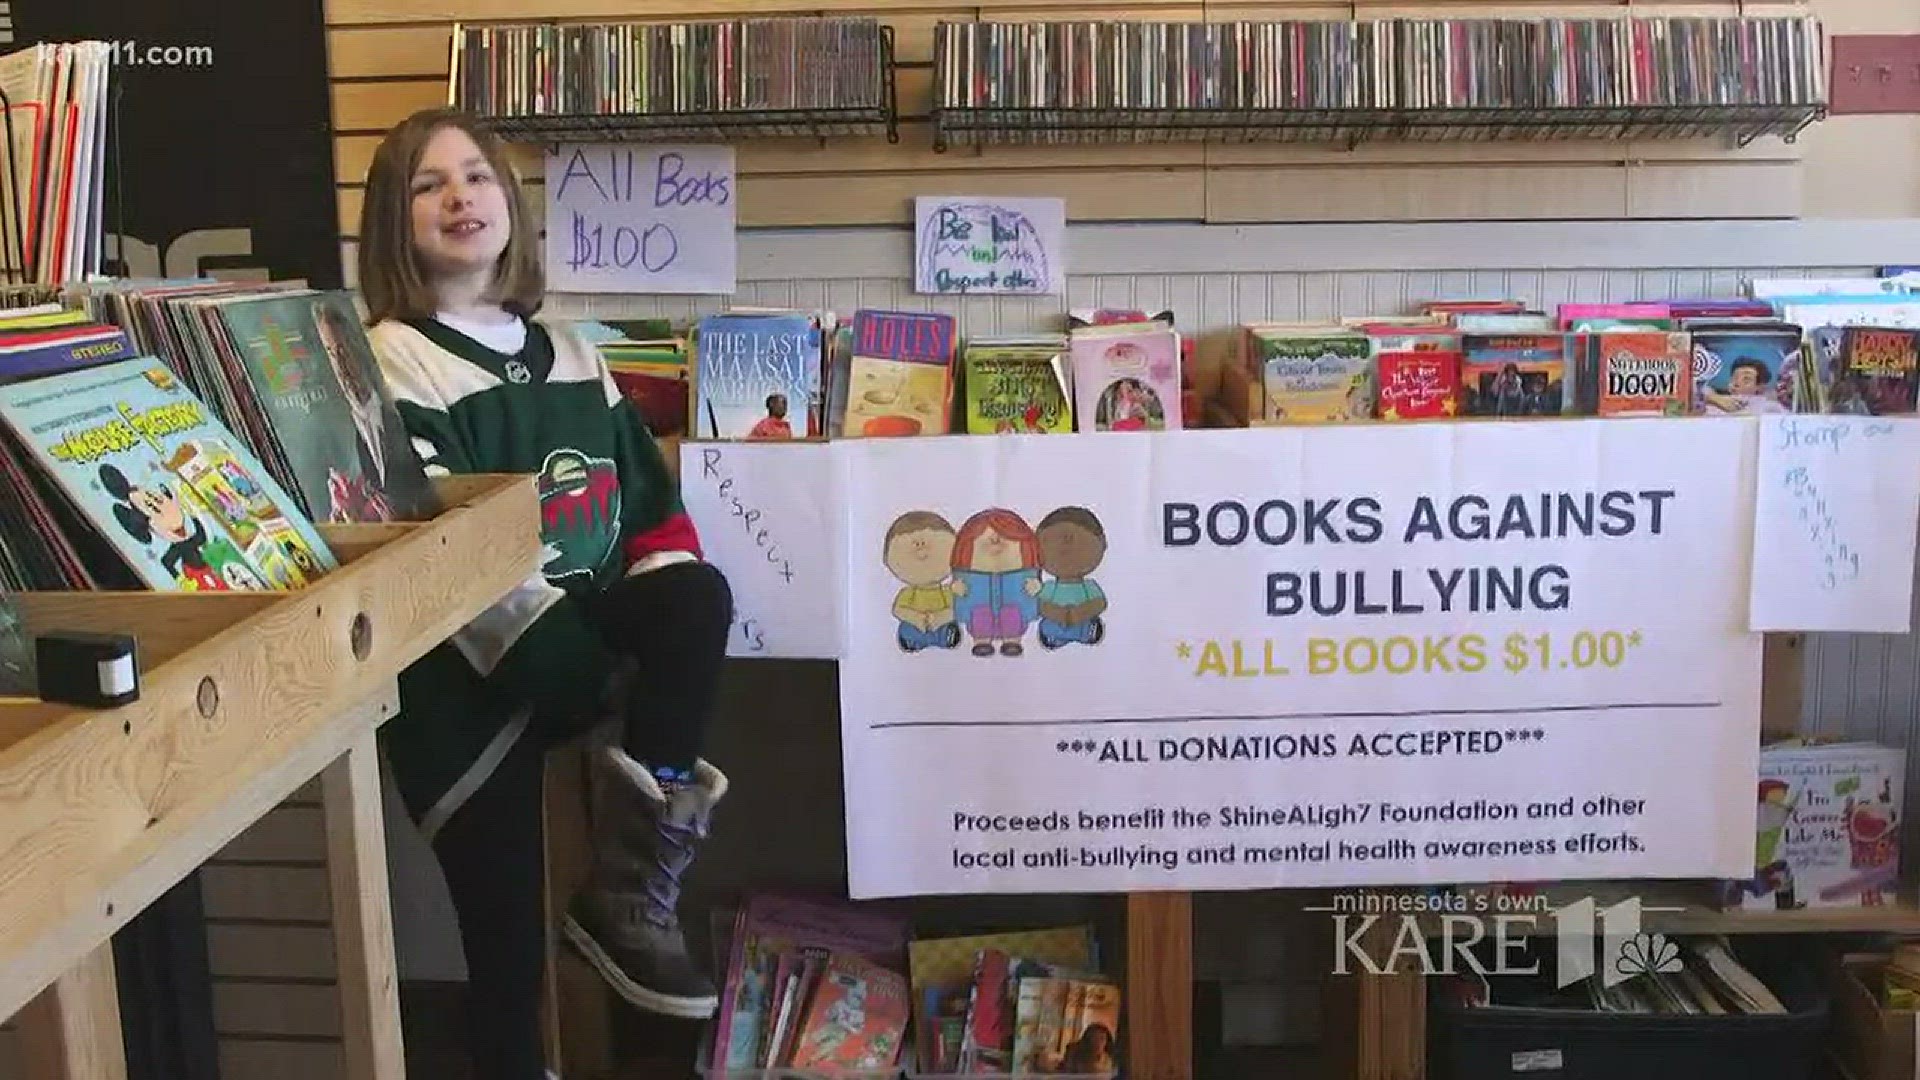 Donated books are sold to raise money to help organizations that fight bullying in "Books Against Bullying."